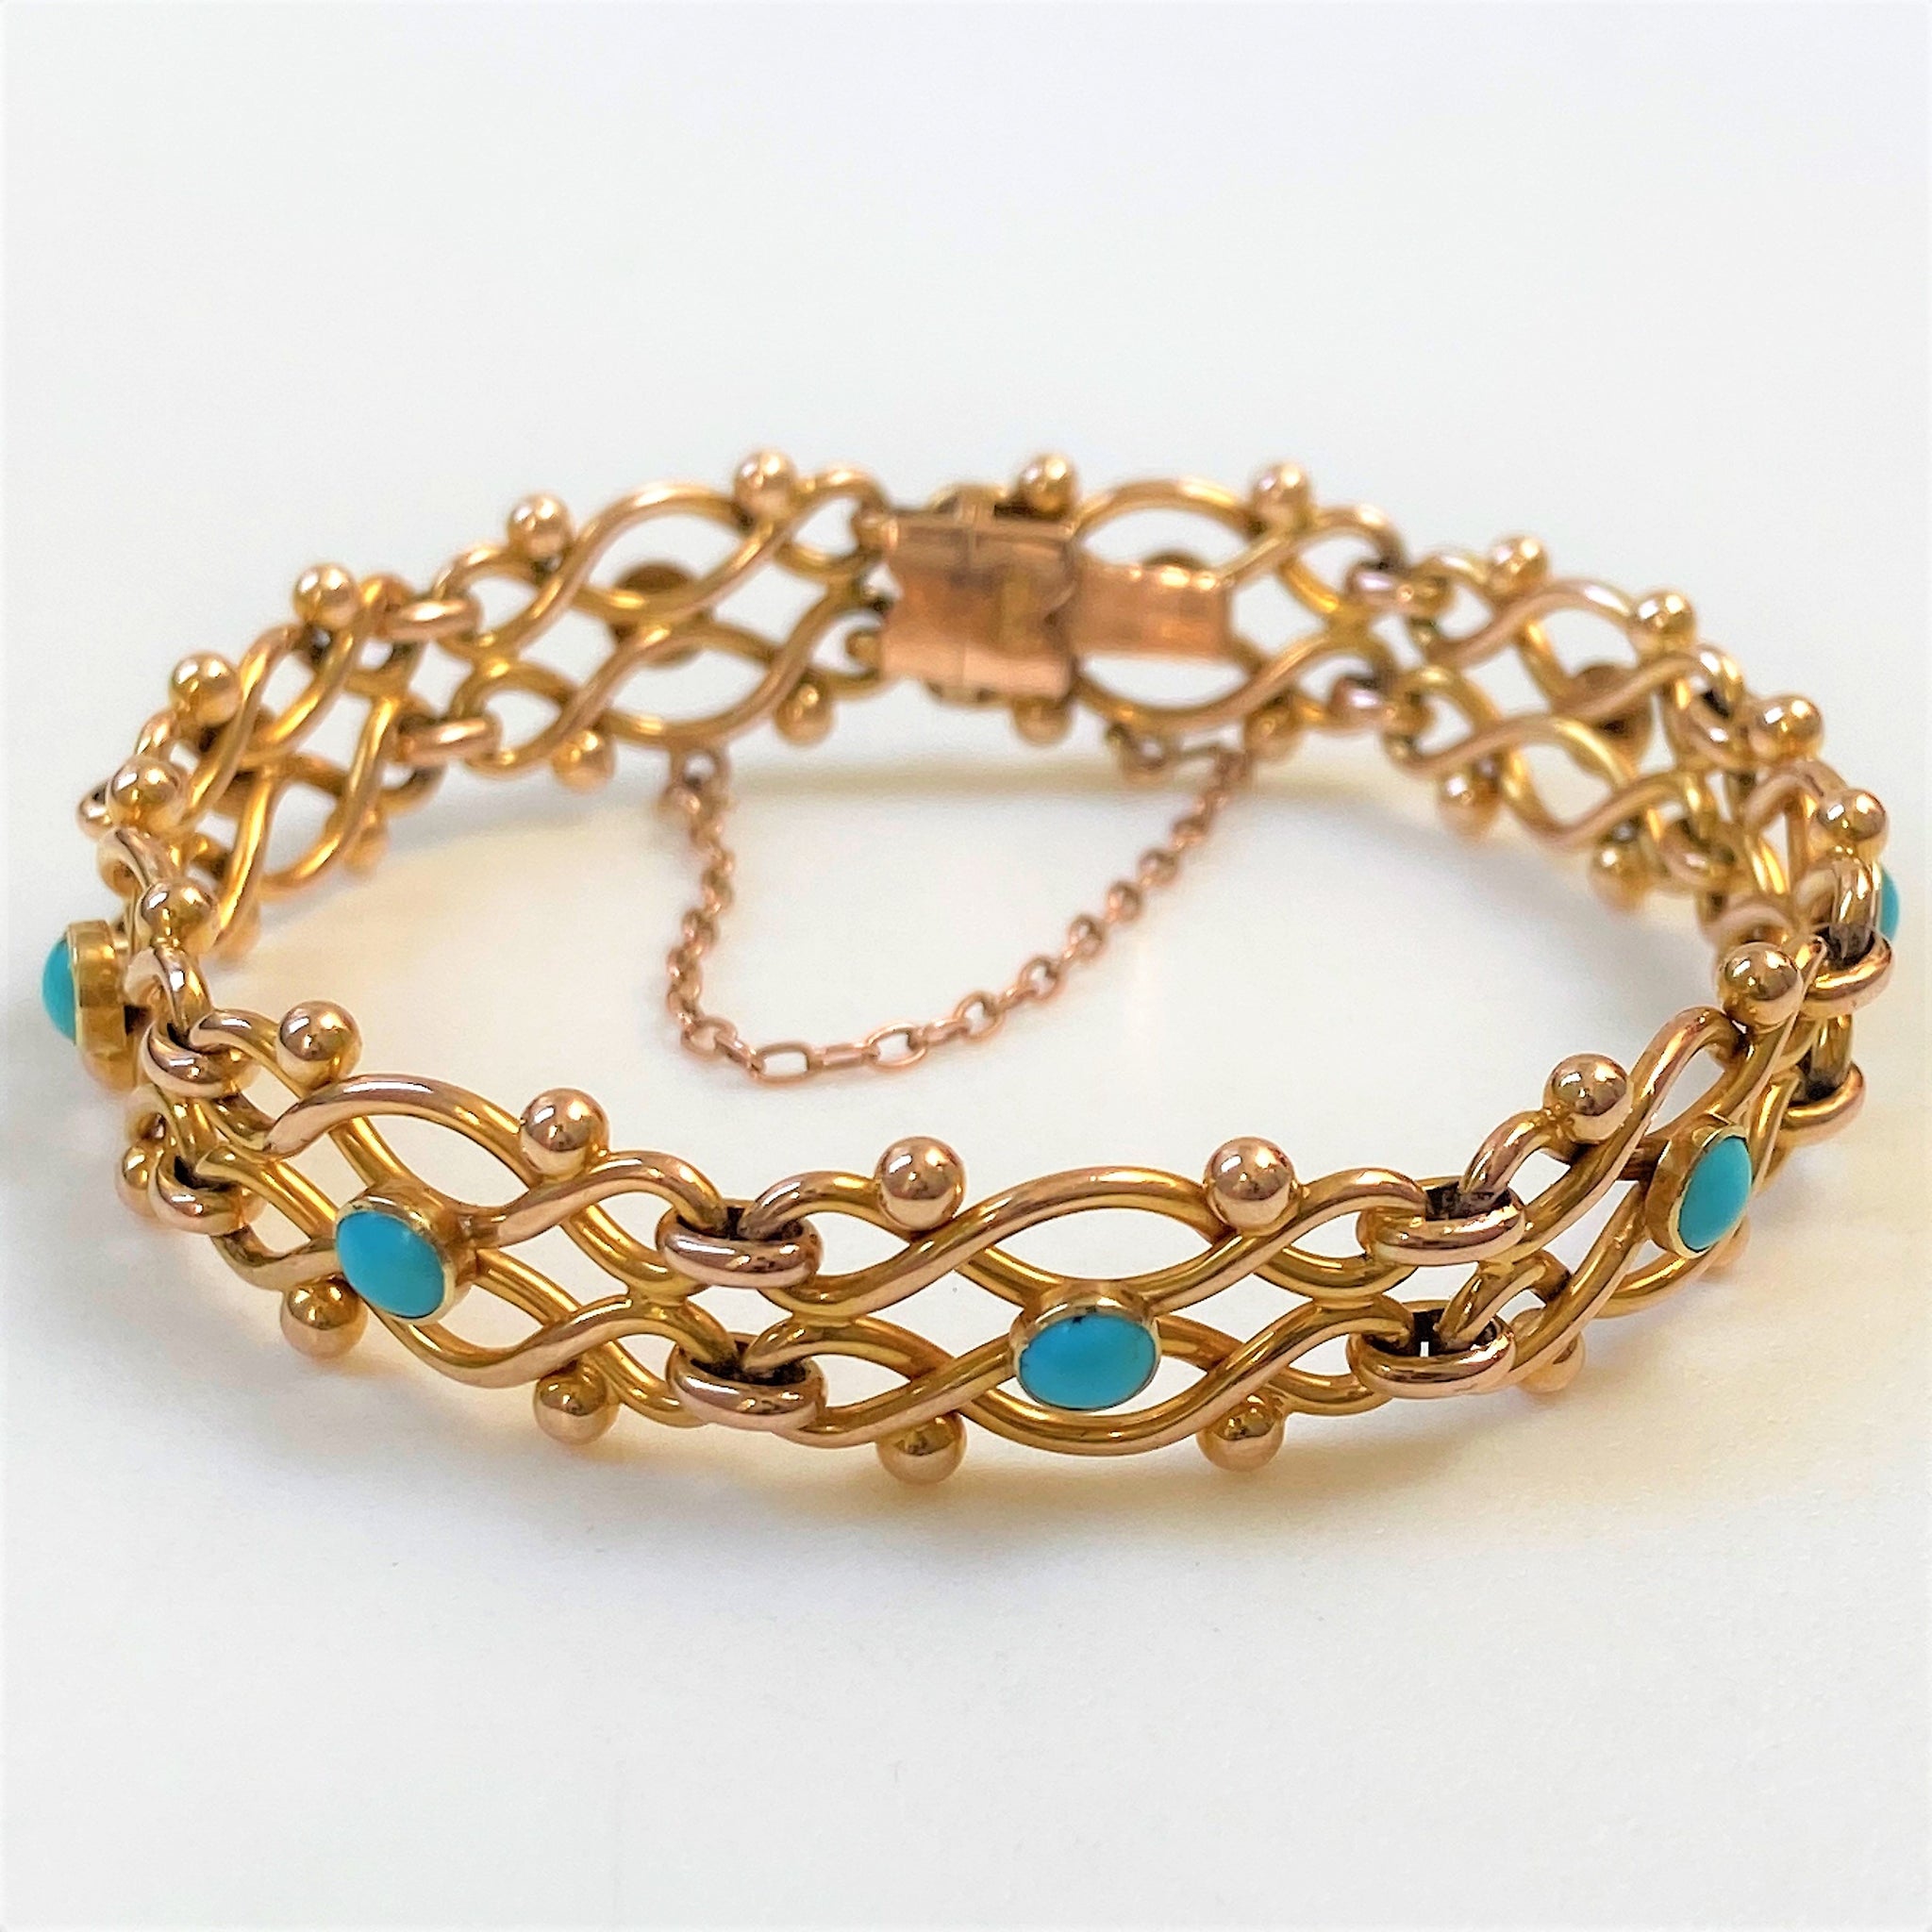 Antique 15ct Gold and Turquoise Bracelet